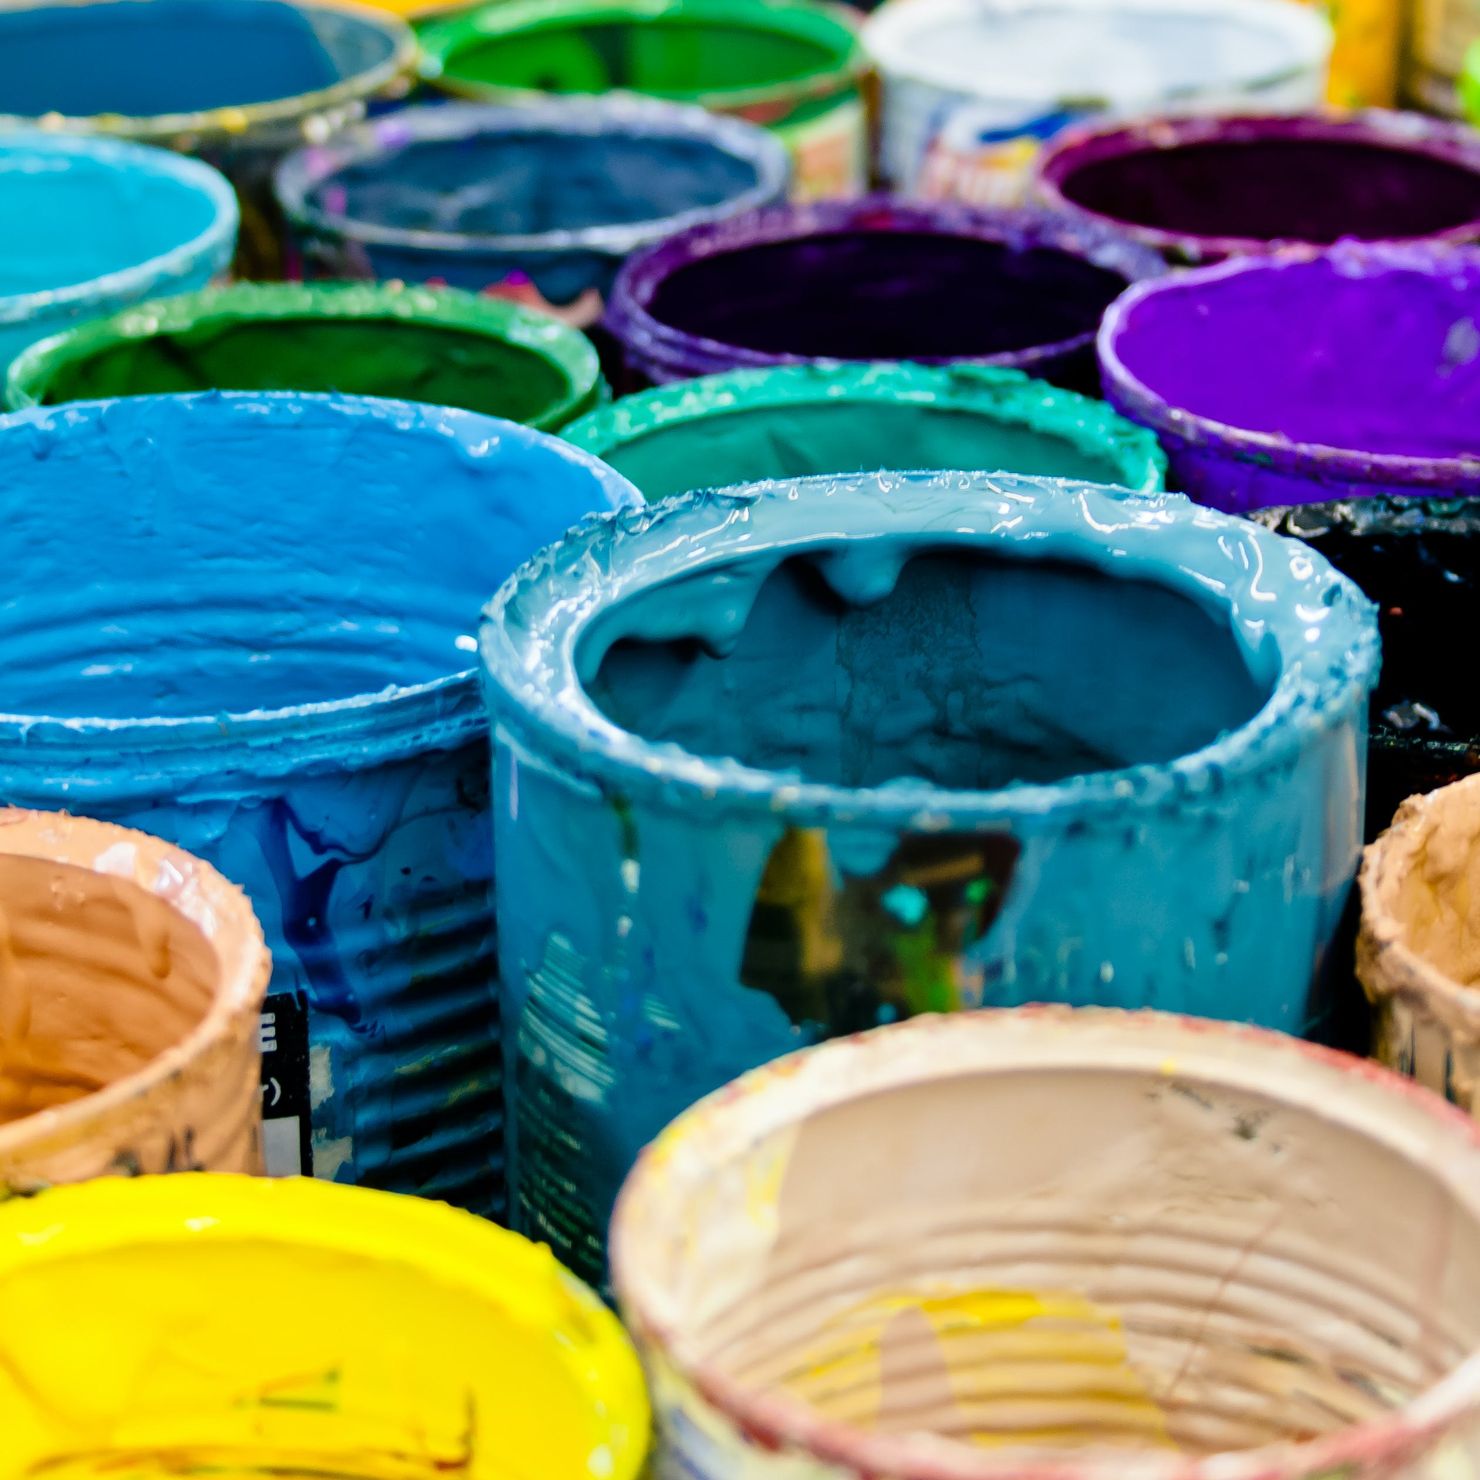 Eco-Friendly Paint Disposal, Sustainable Paint Storage, Paint Recycling Options, Paint Longevity Practices, Environmentally Safe Paint Handling